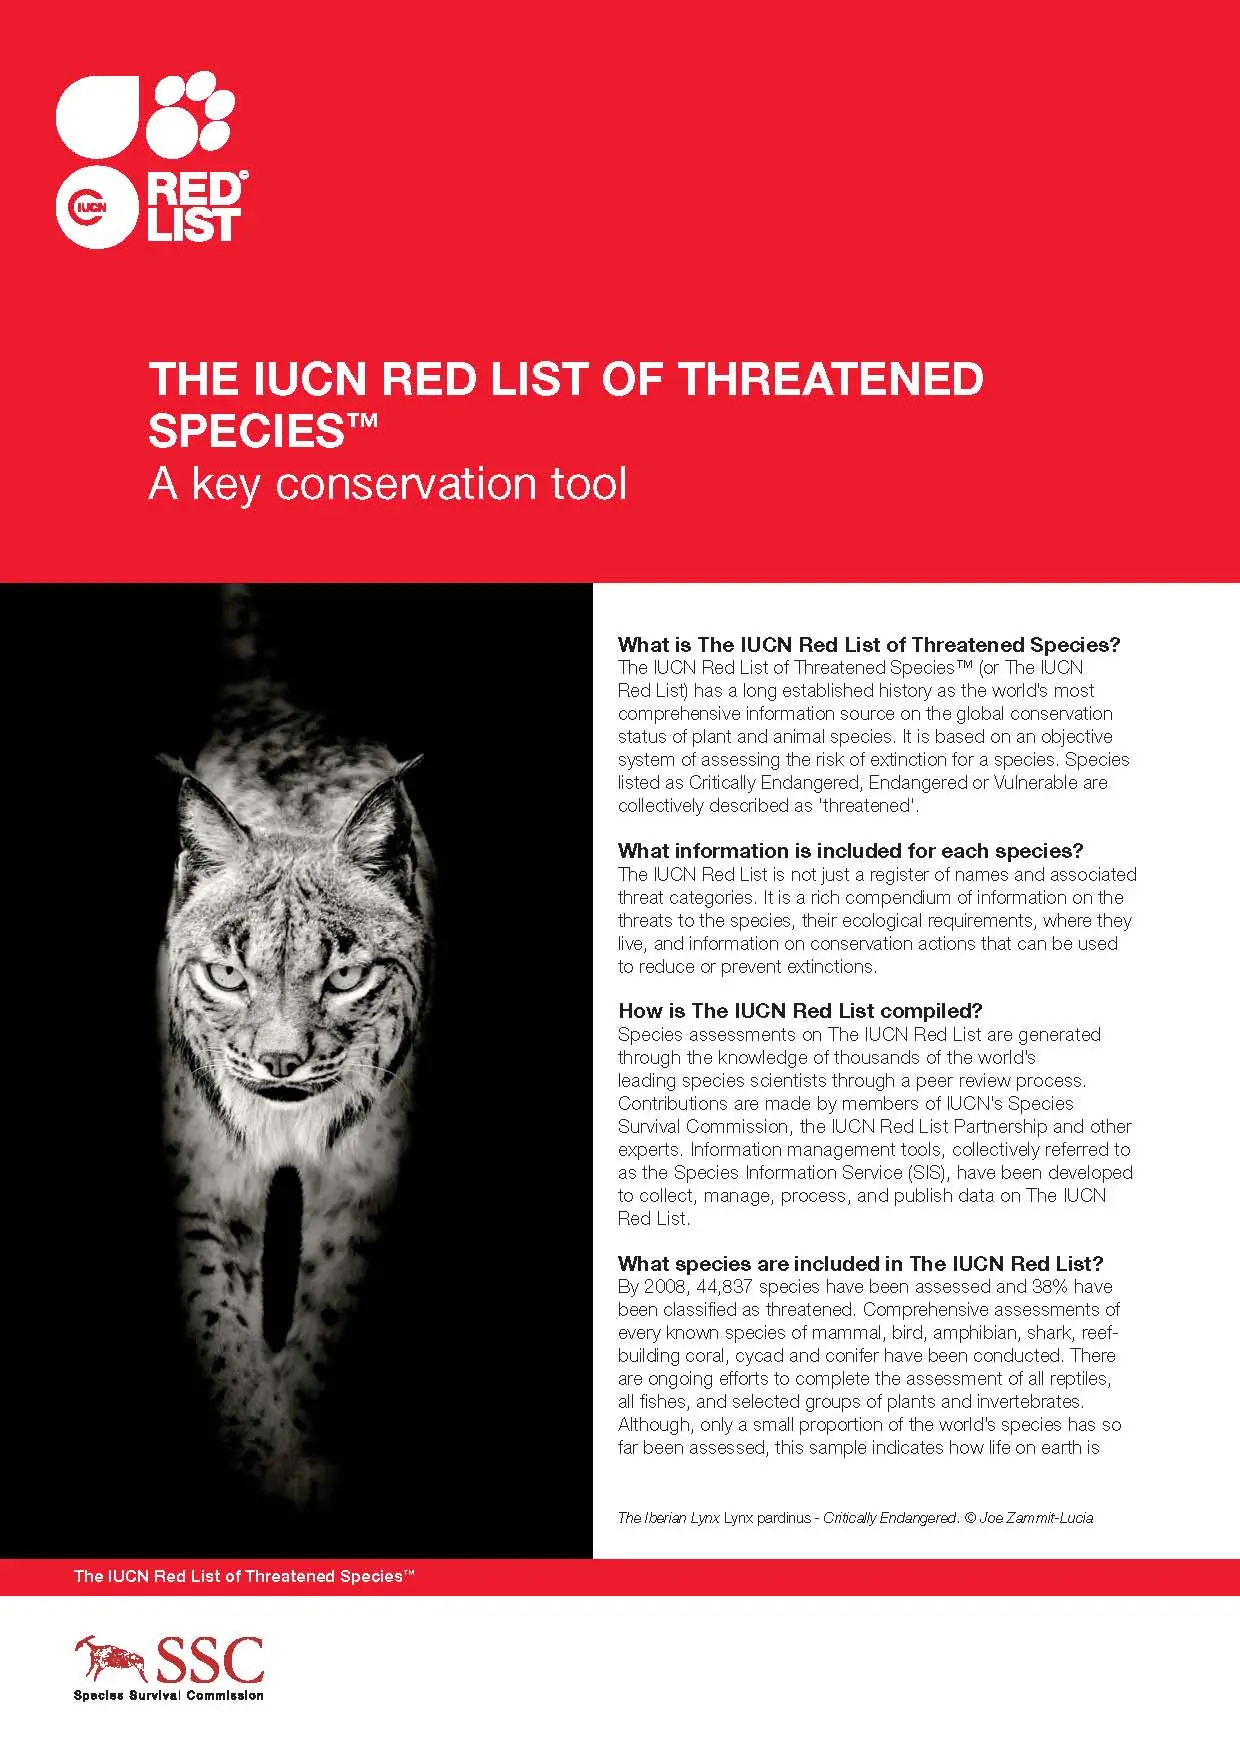 The IUCN Red List a key conservation tool factsheet